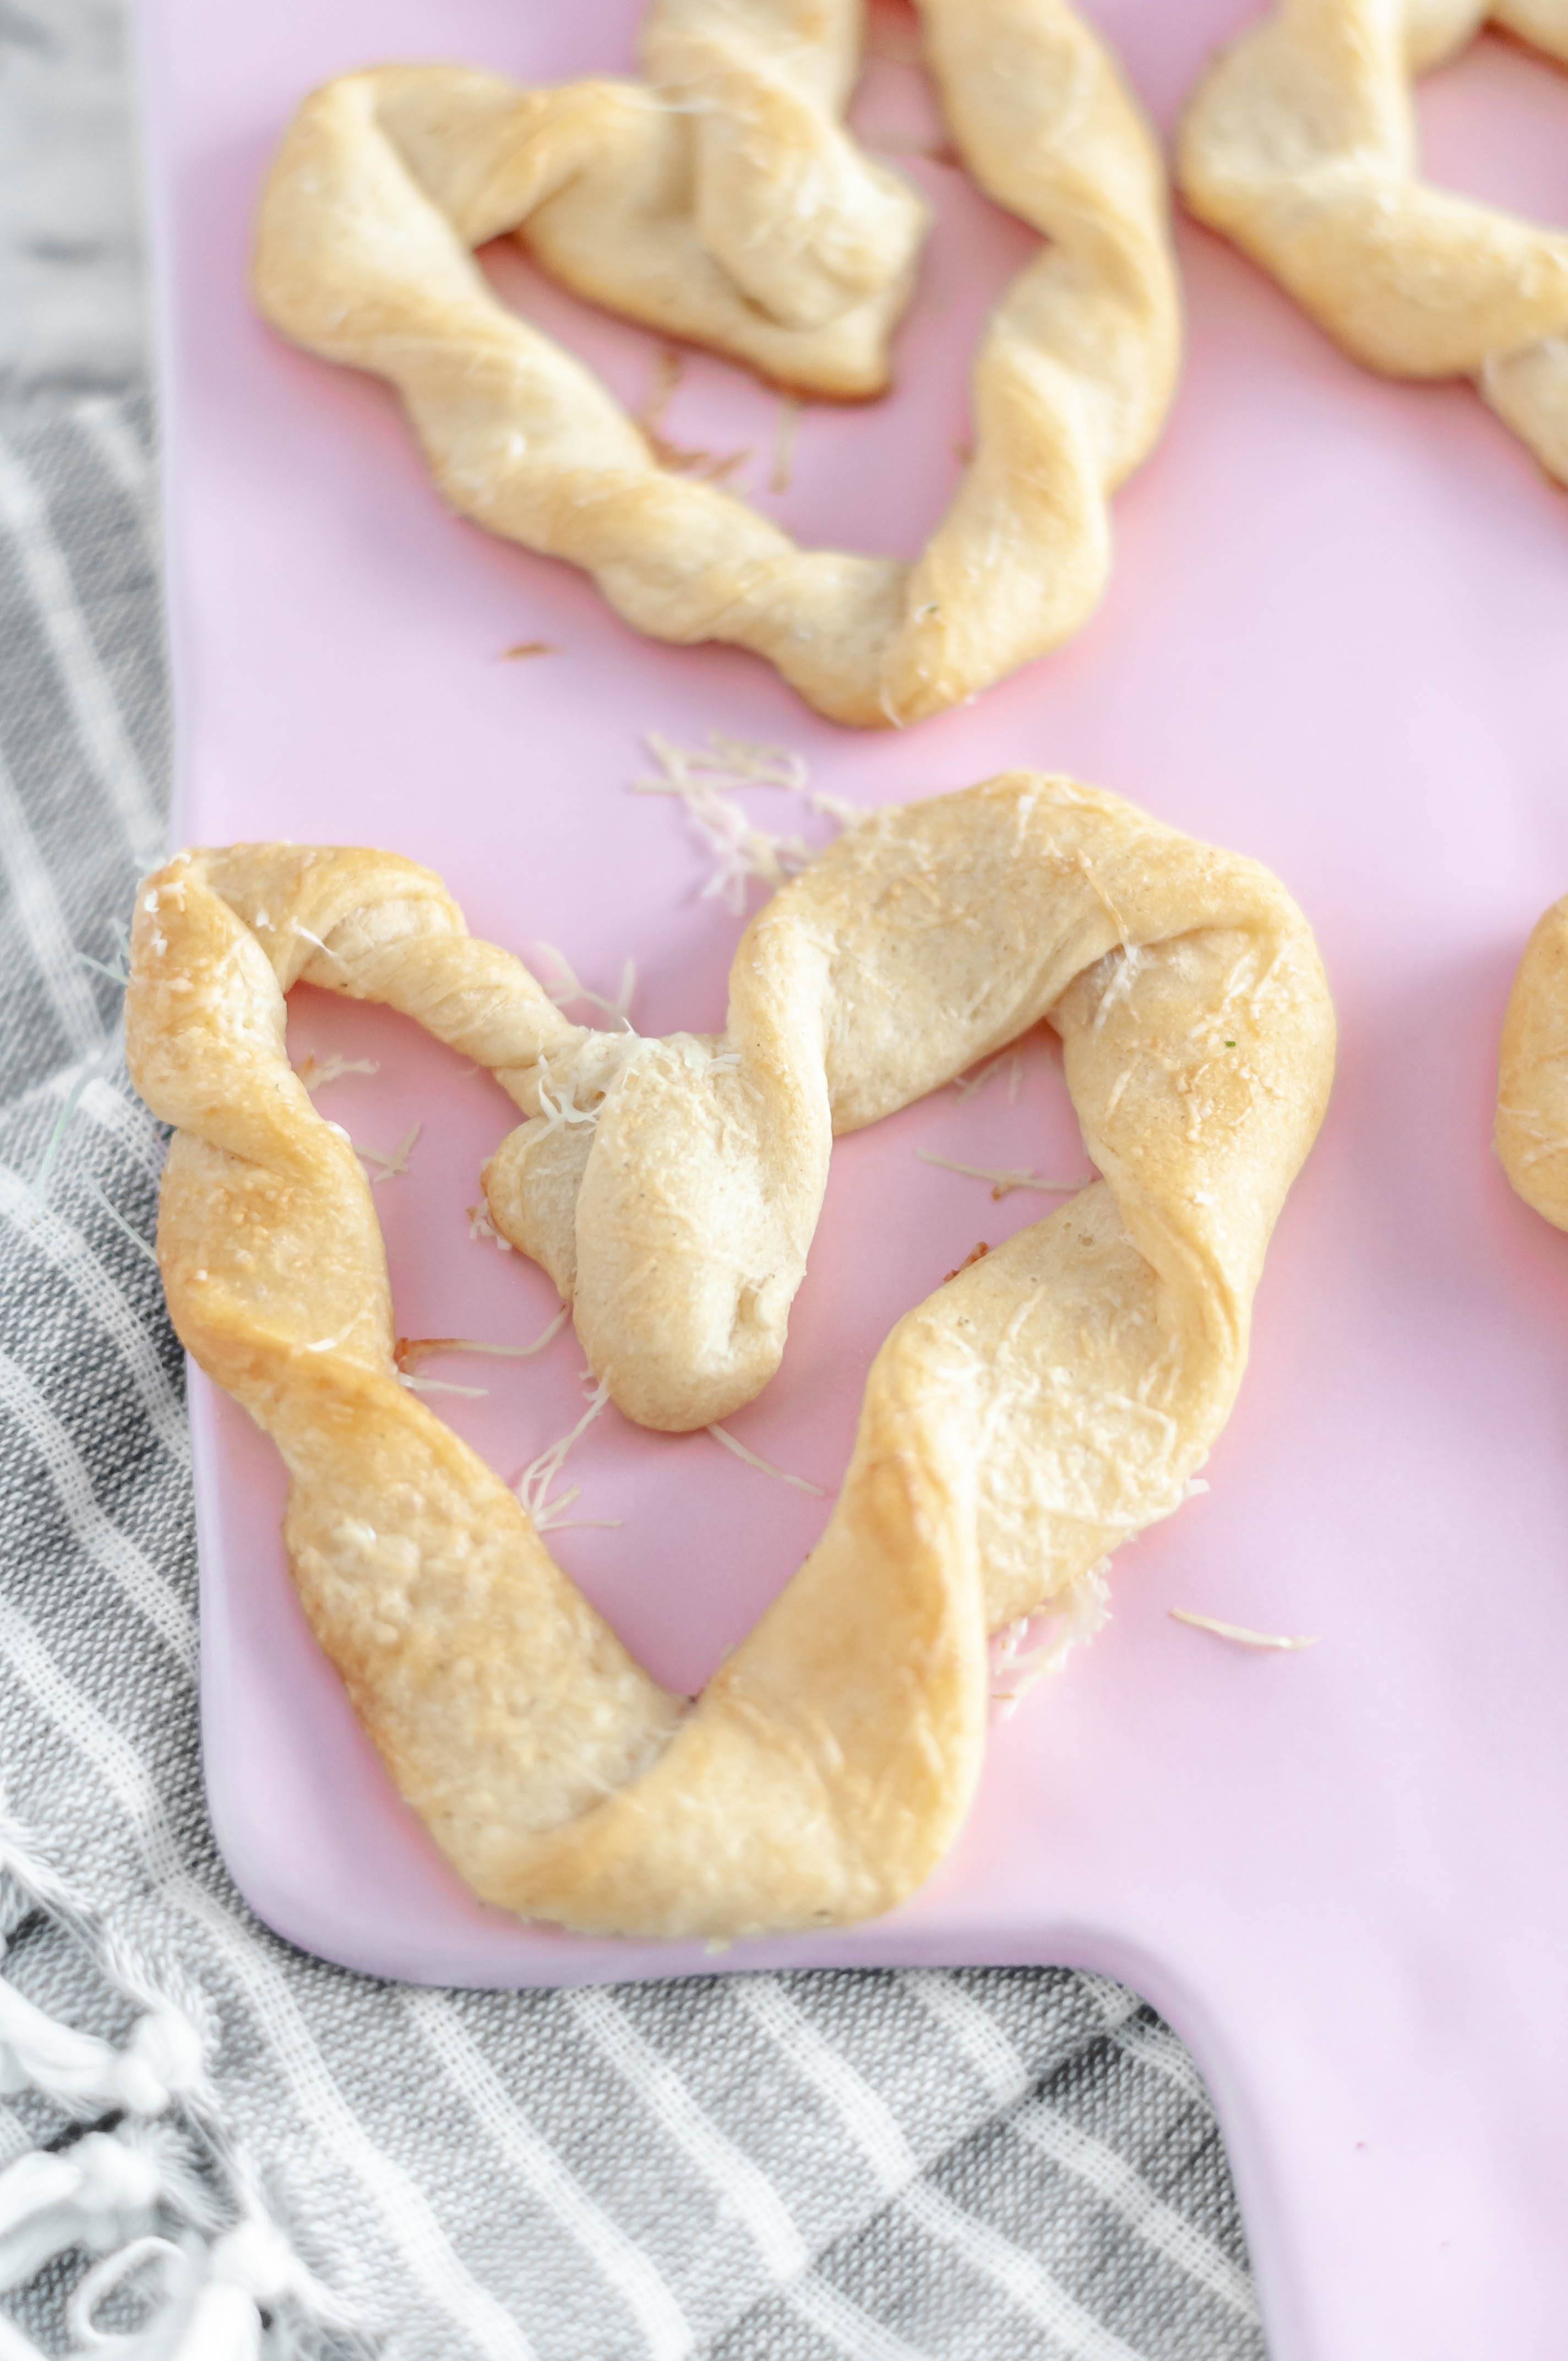 Heart Shaped Breadsticks are a simple way to add some festive flair to Valentines. Store-bought crescent dough & a few simple ingredients are all you need.